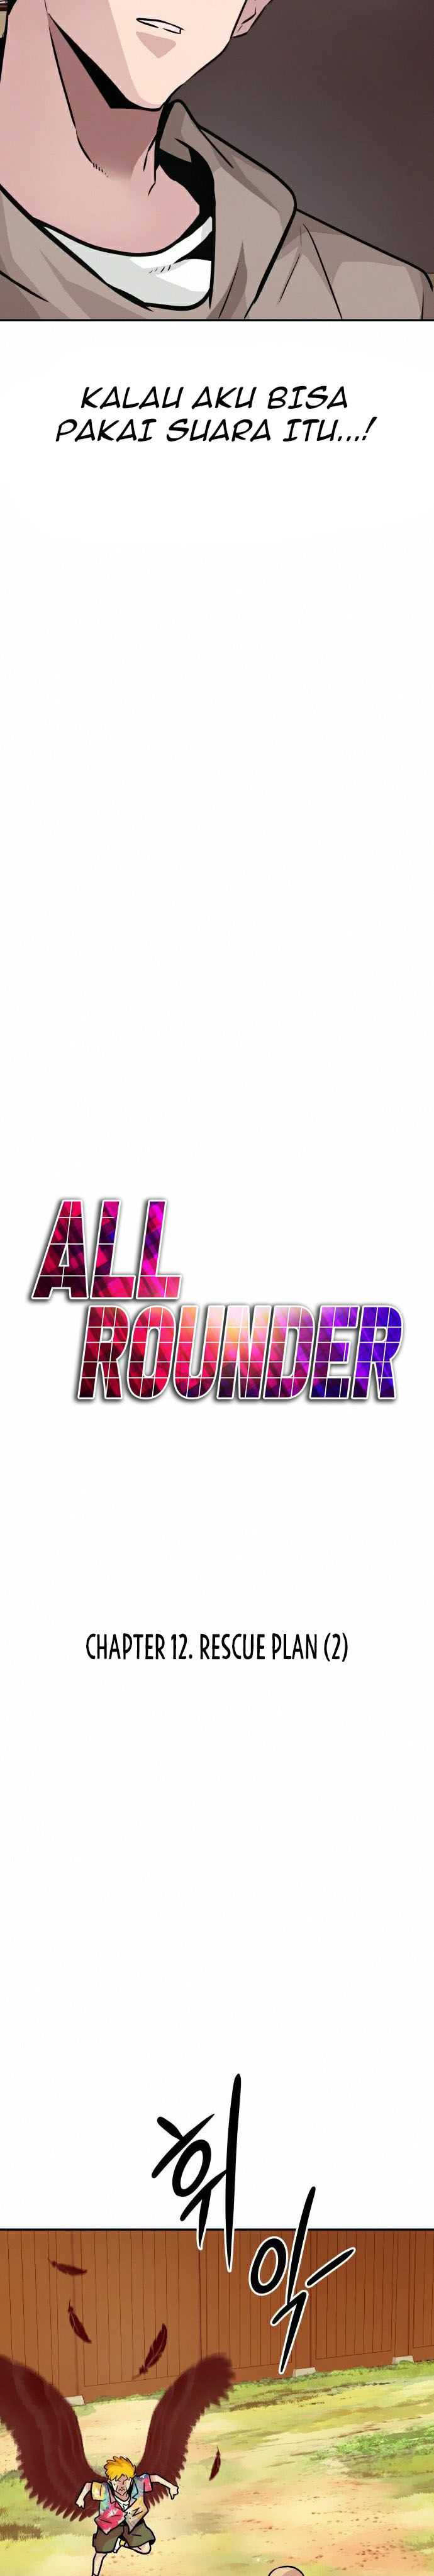 All Rounder Chapter 12 39